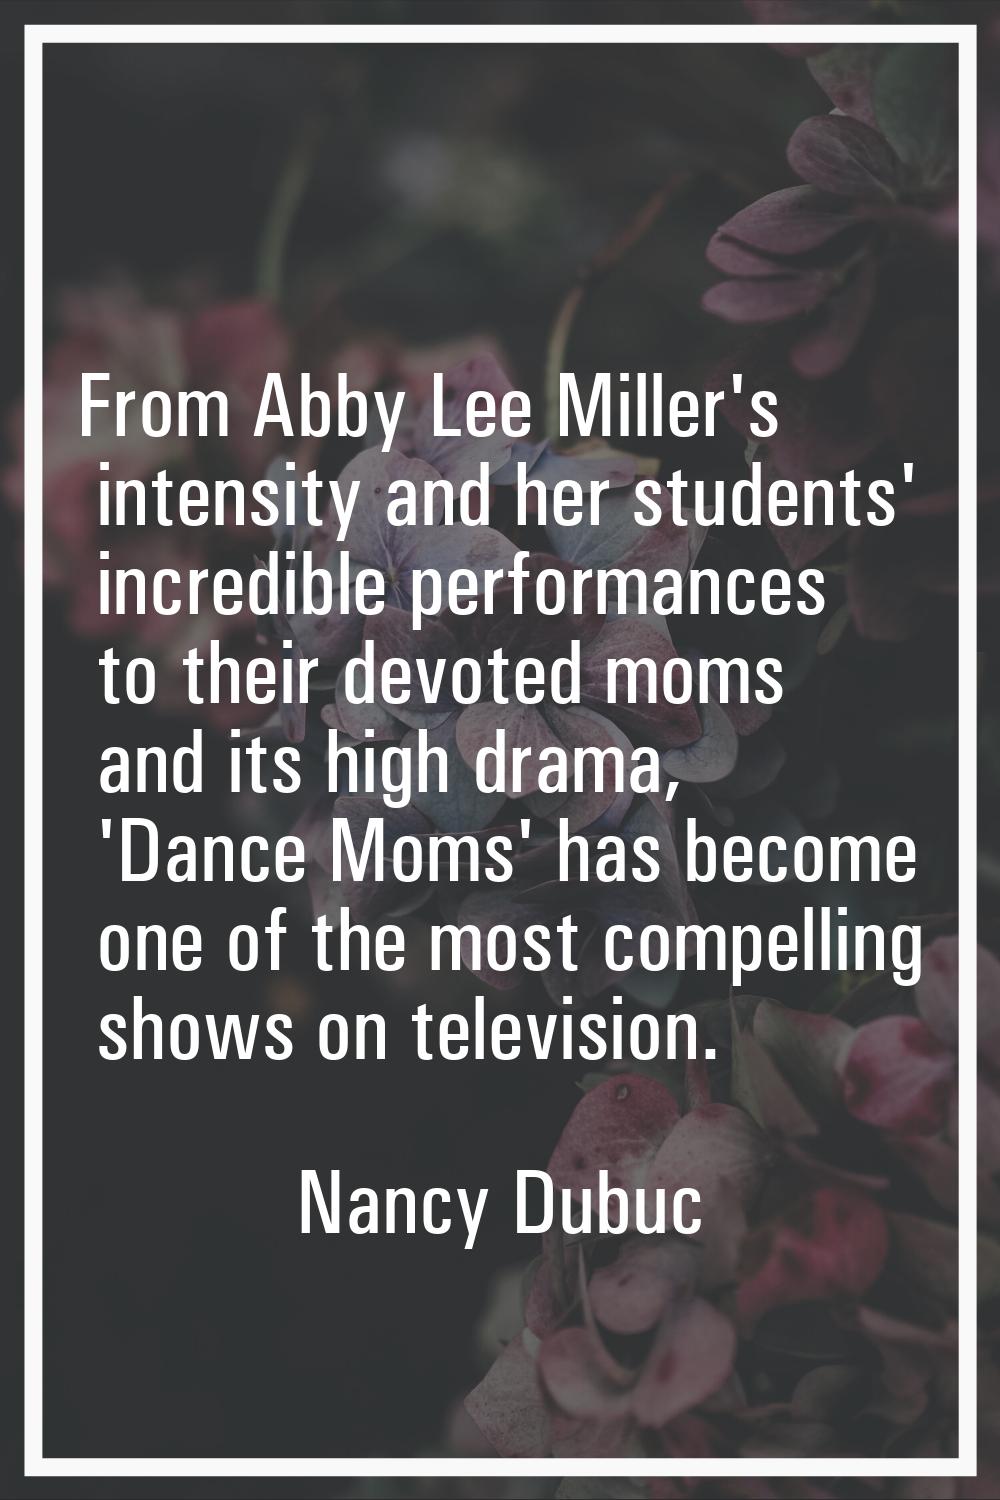 From Abby Lee Miller's intensity and her students' incredible performances to their devoted moms an